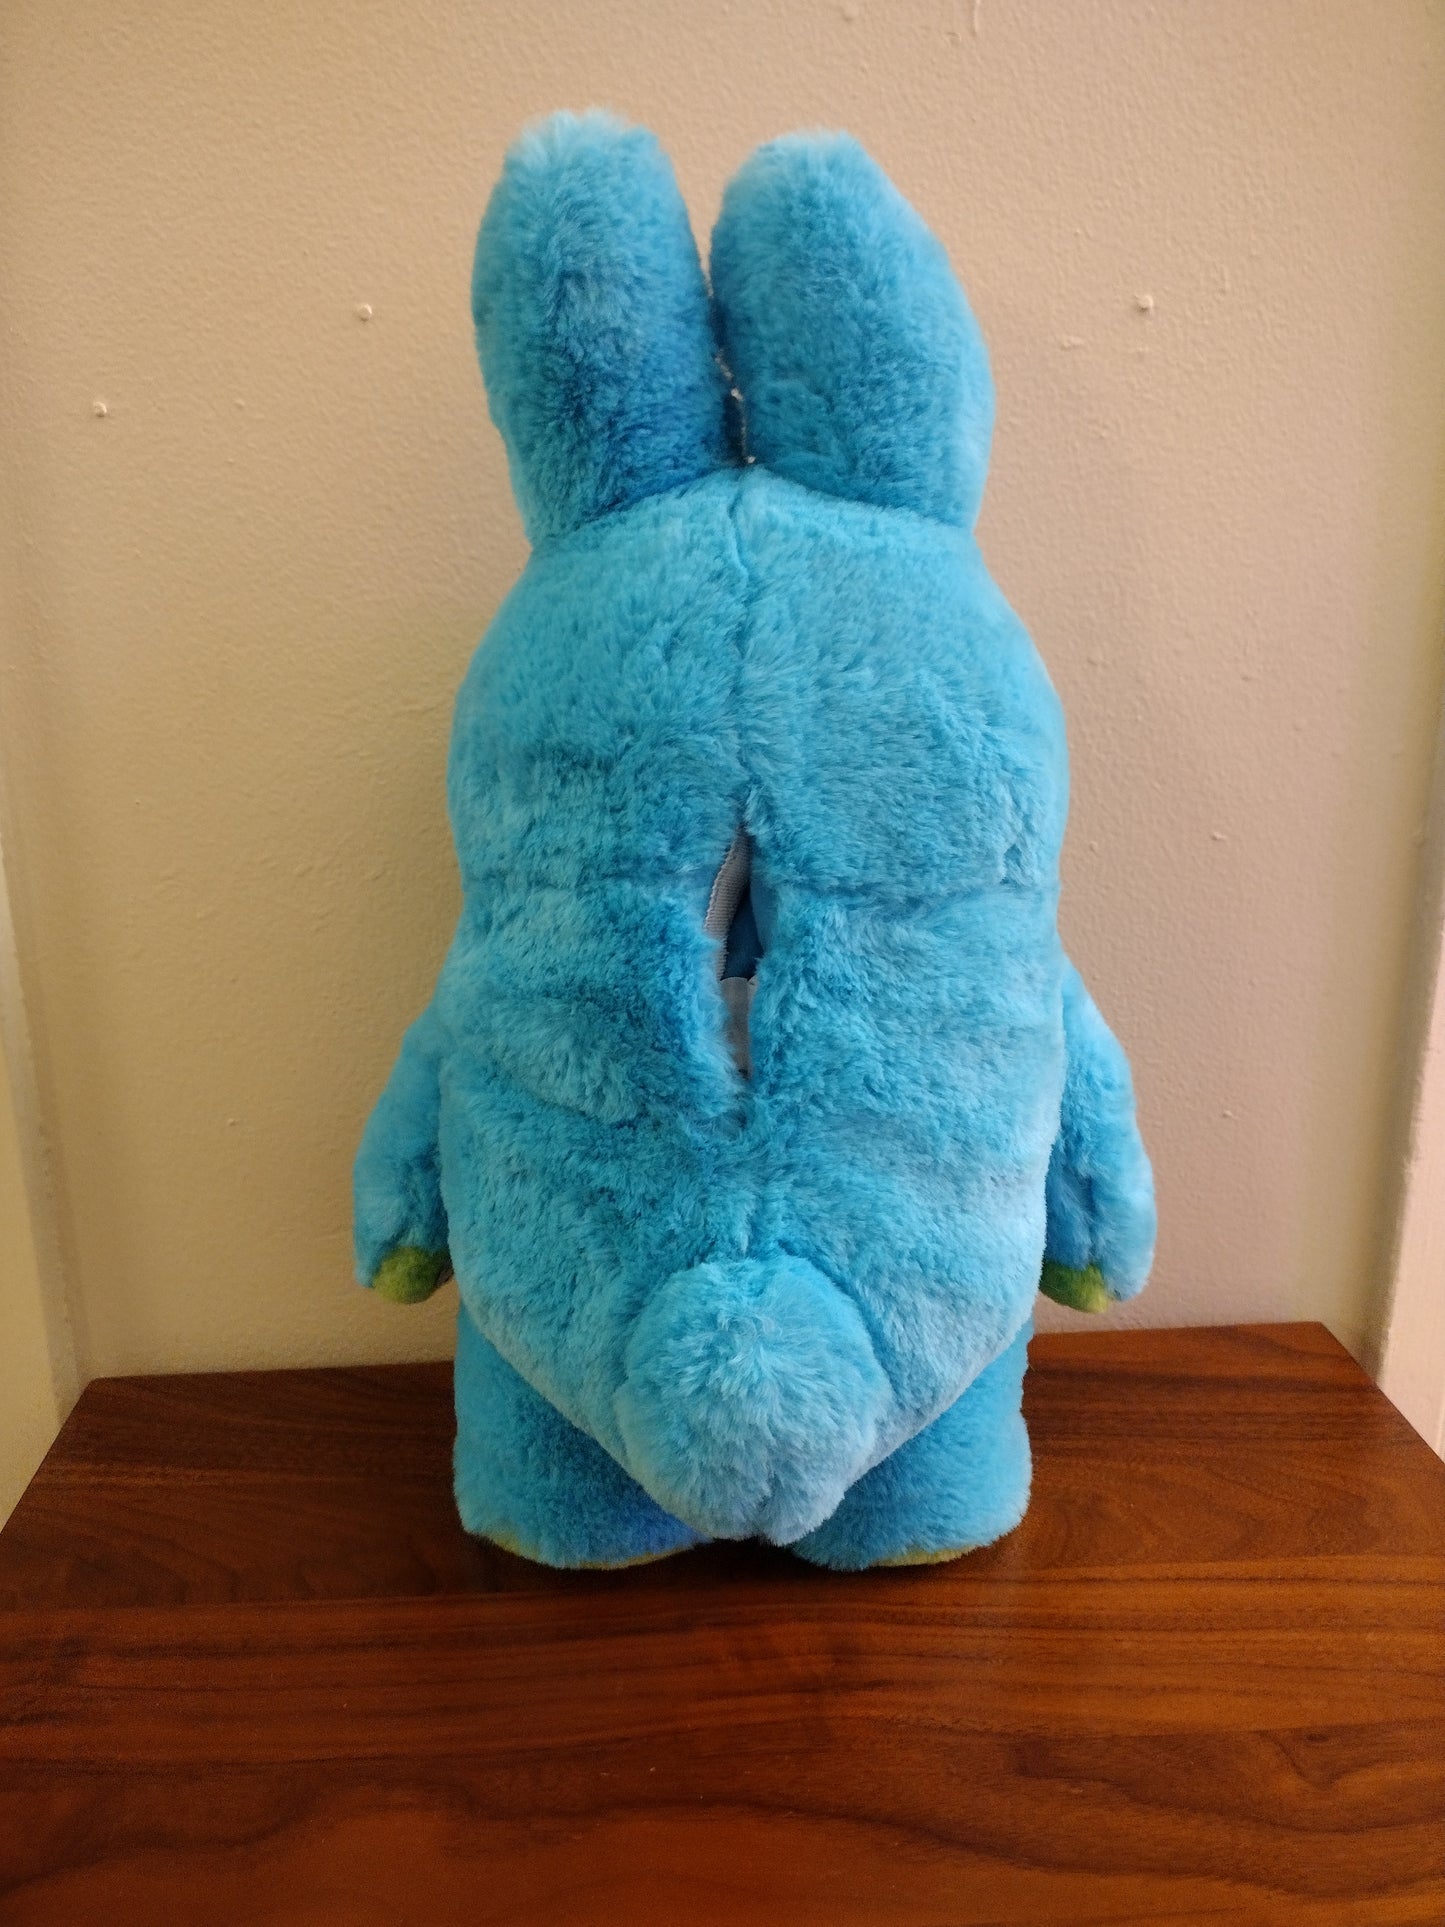 Disney Store Exclusive Pixar 4 Toy Story 4 Talking Plush Bunny Pre Owned Good Condition